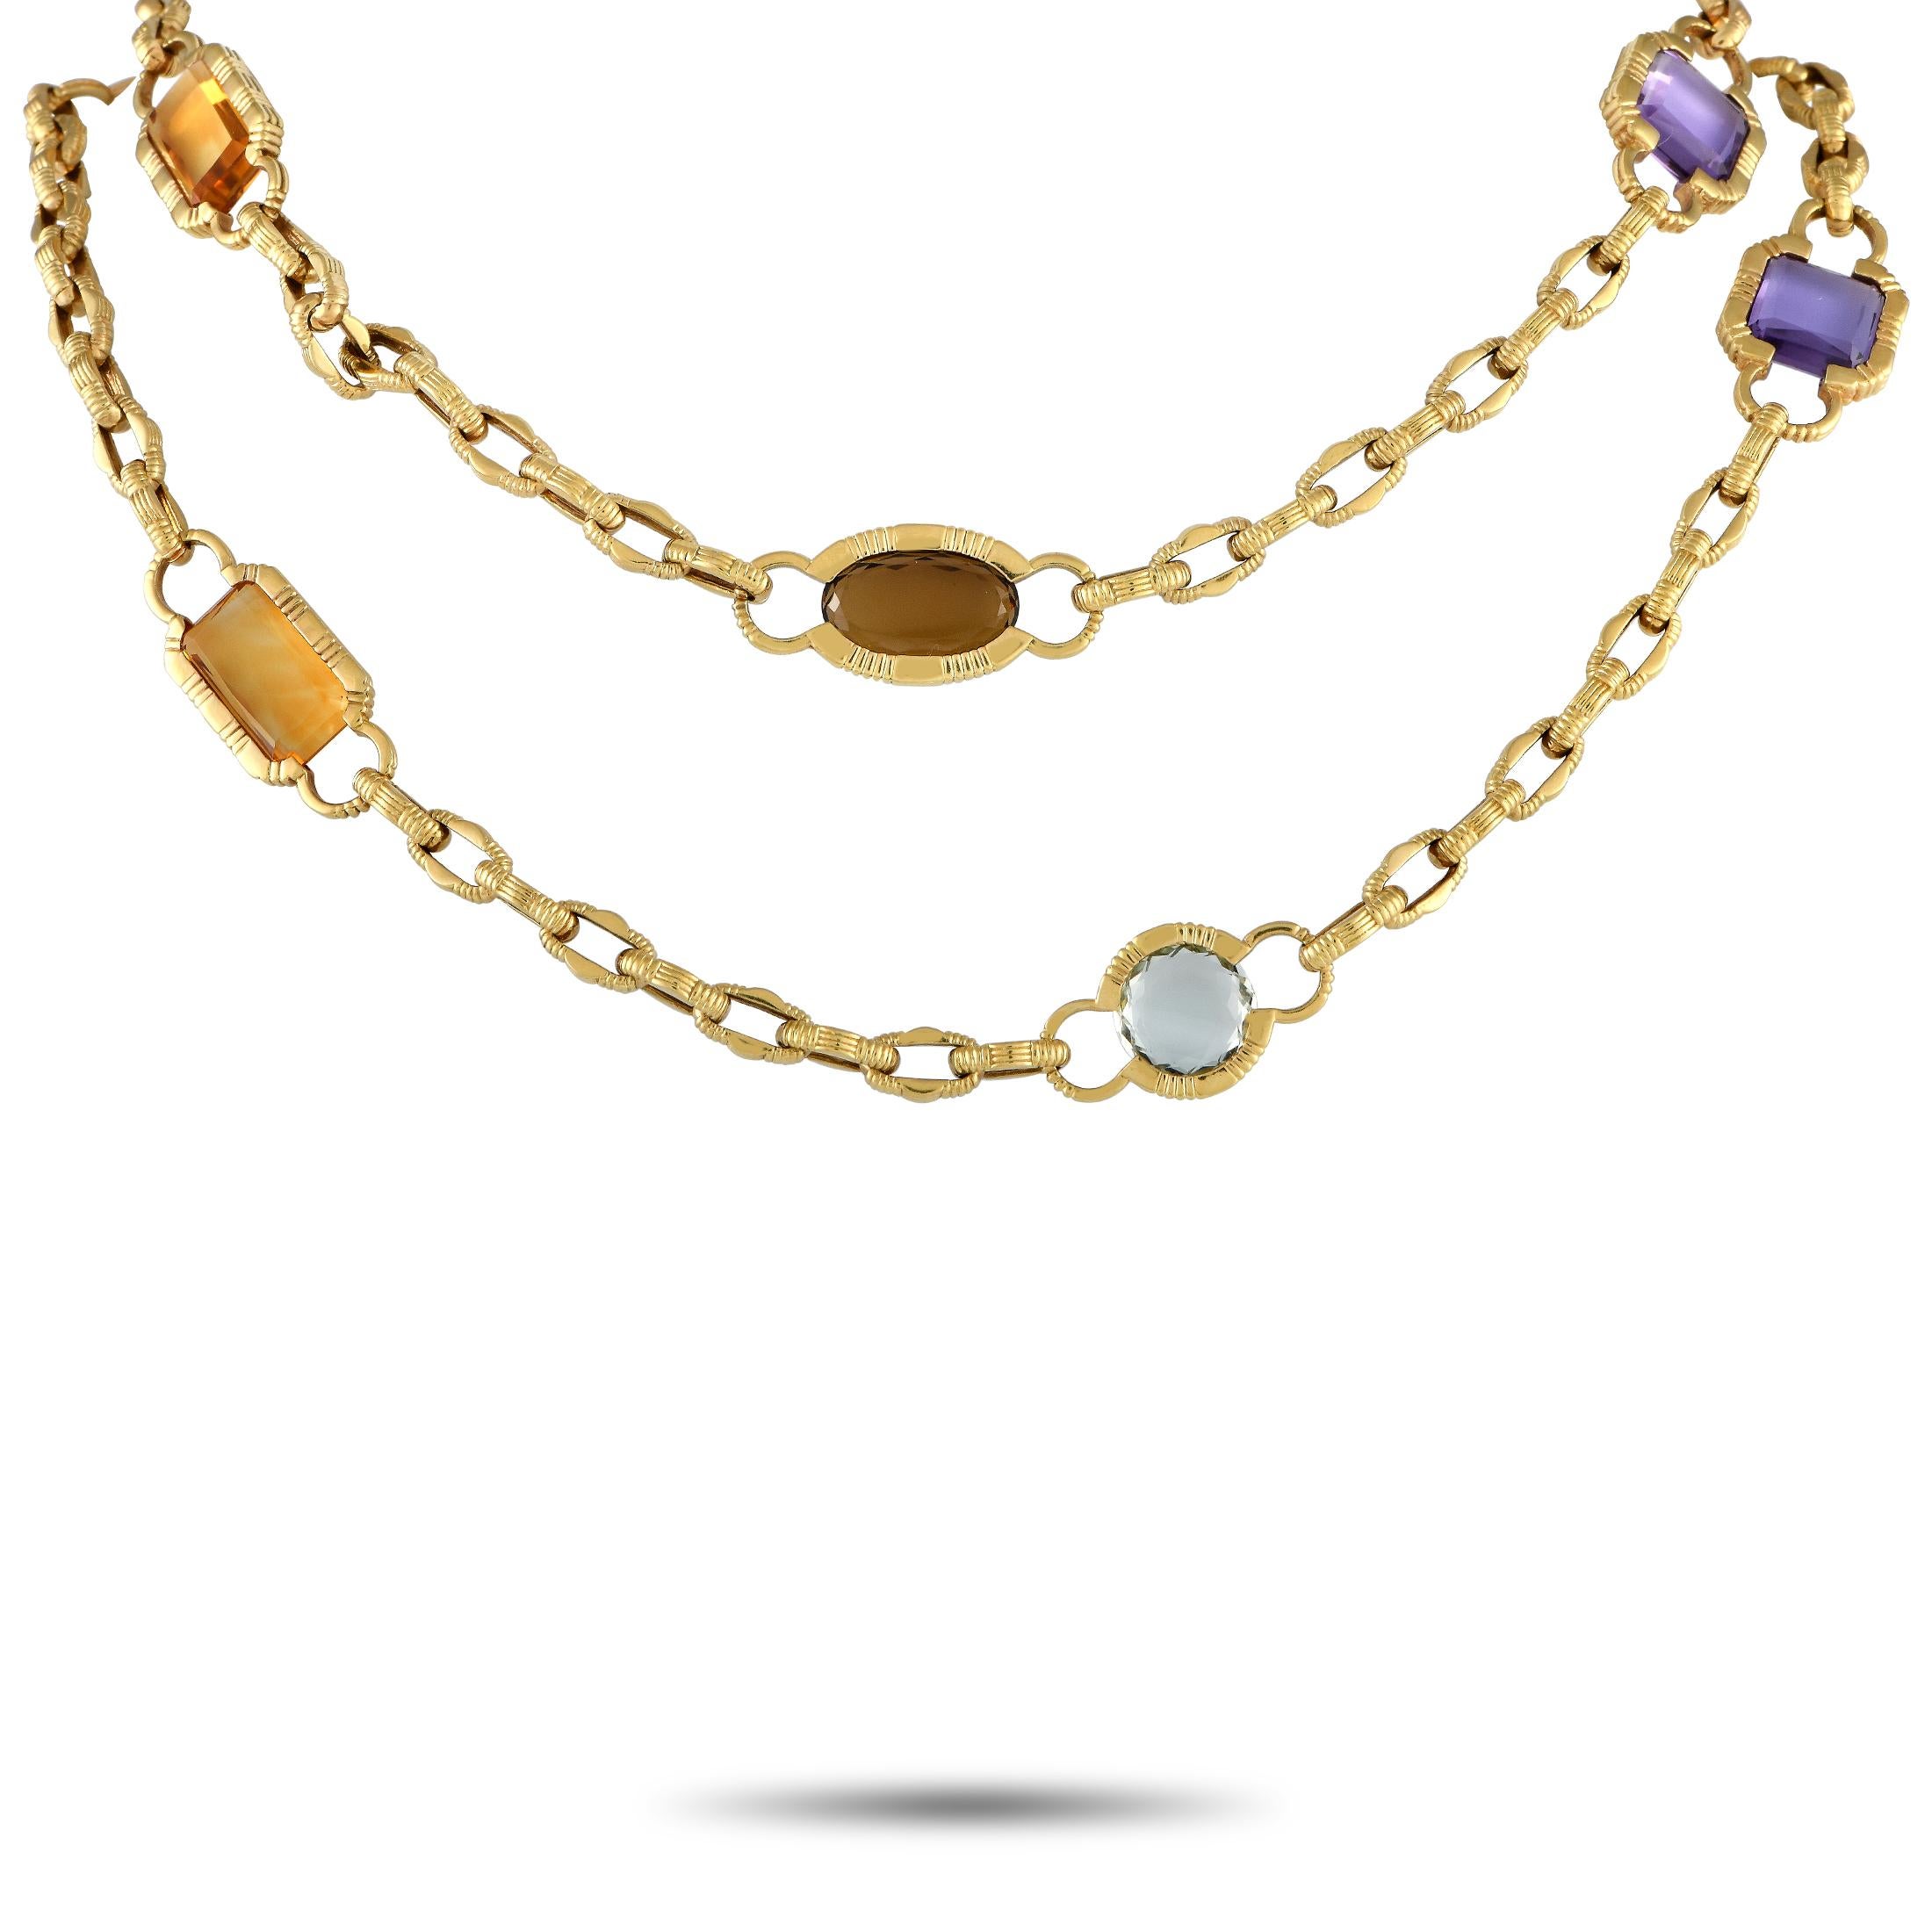 Infuse whimsical elegance to your wardrobe through this Roberto Coin long necklace in 18K yellow gold. The necklace features a 31-inch-long chain of textured links interspersed with gemstone stations for that pop of color and soft brilliance. This